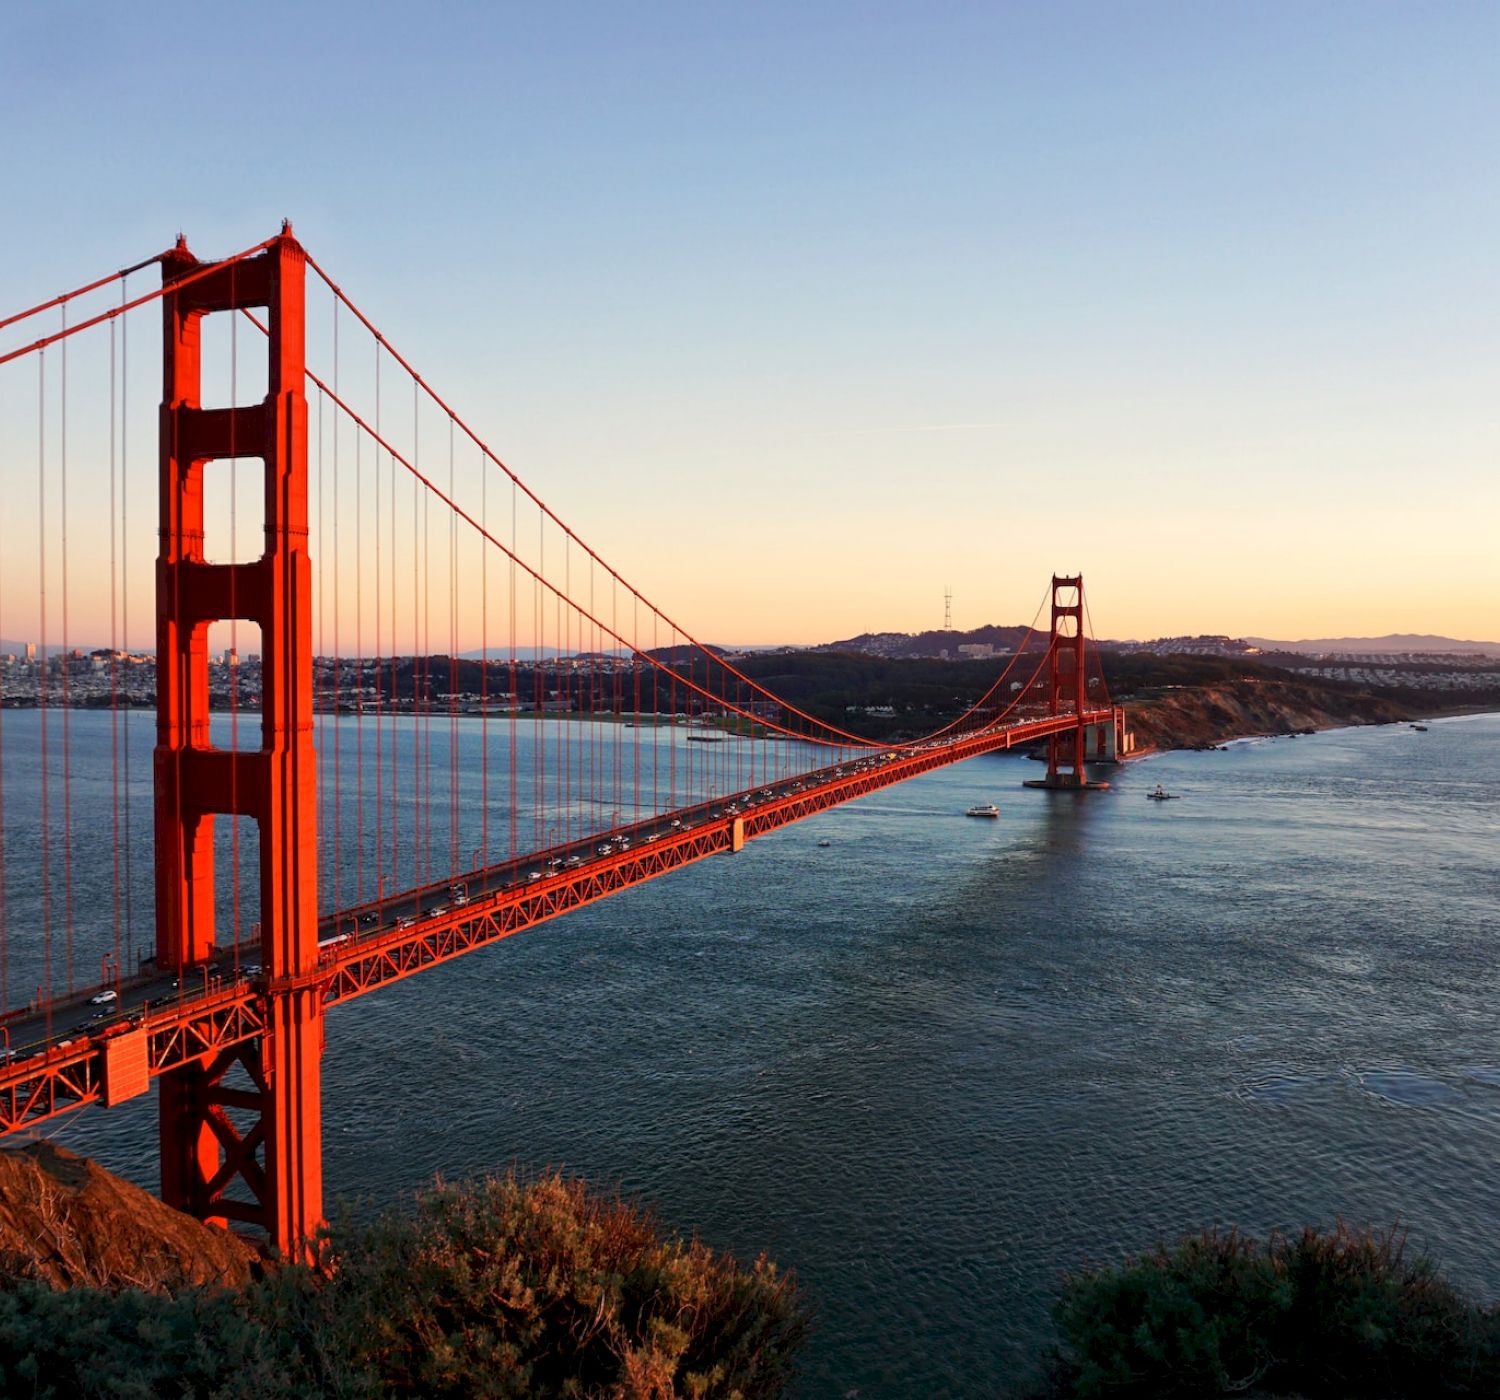 This image shows the Golden Gate Bridge at sunset, with the reddish-orange structure spanning across a body of water.